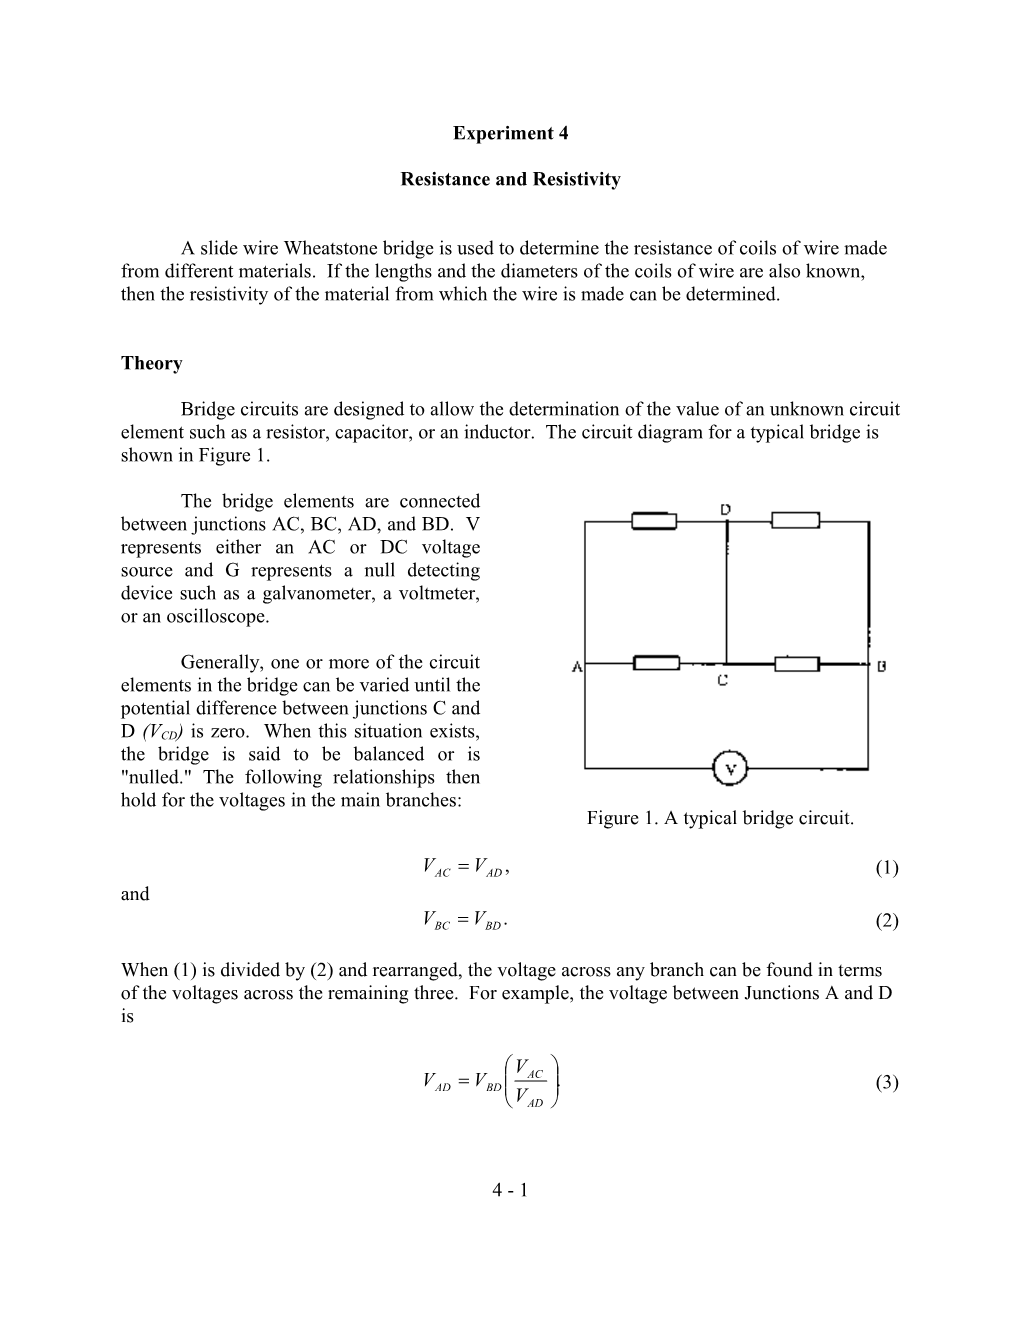 Resistance and Resistivity